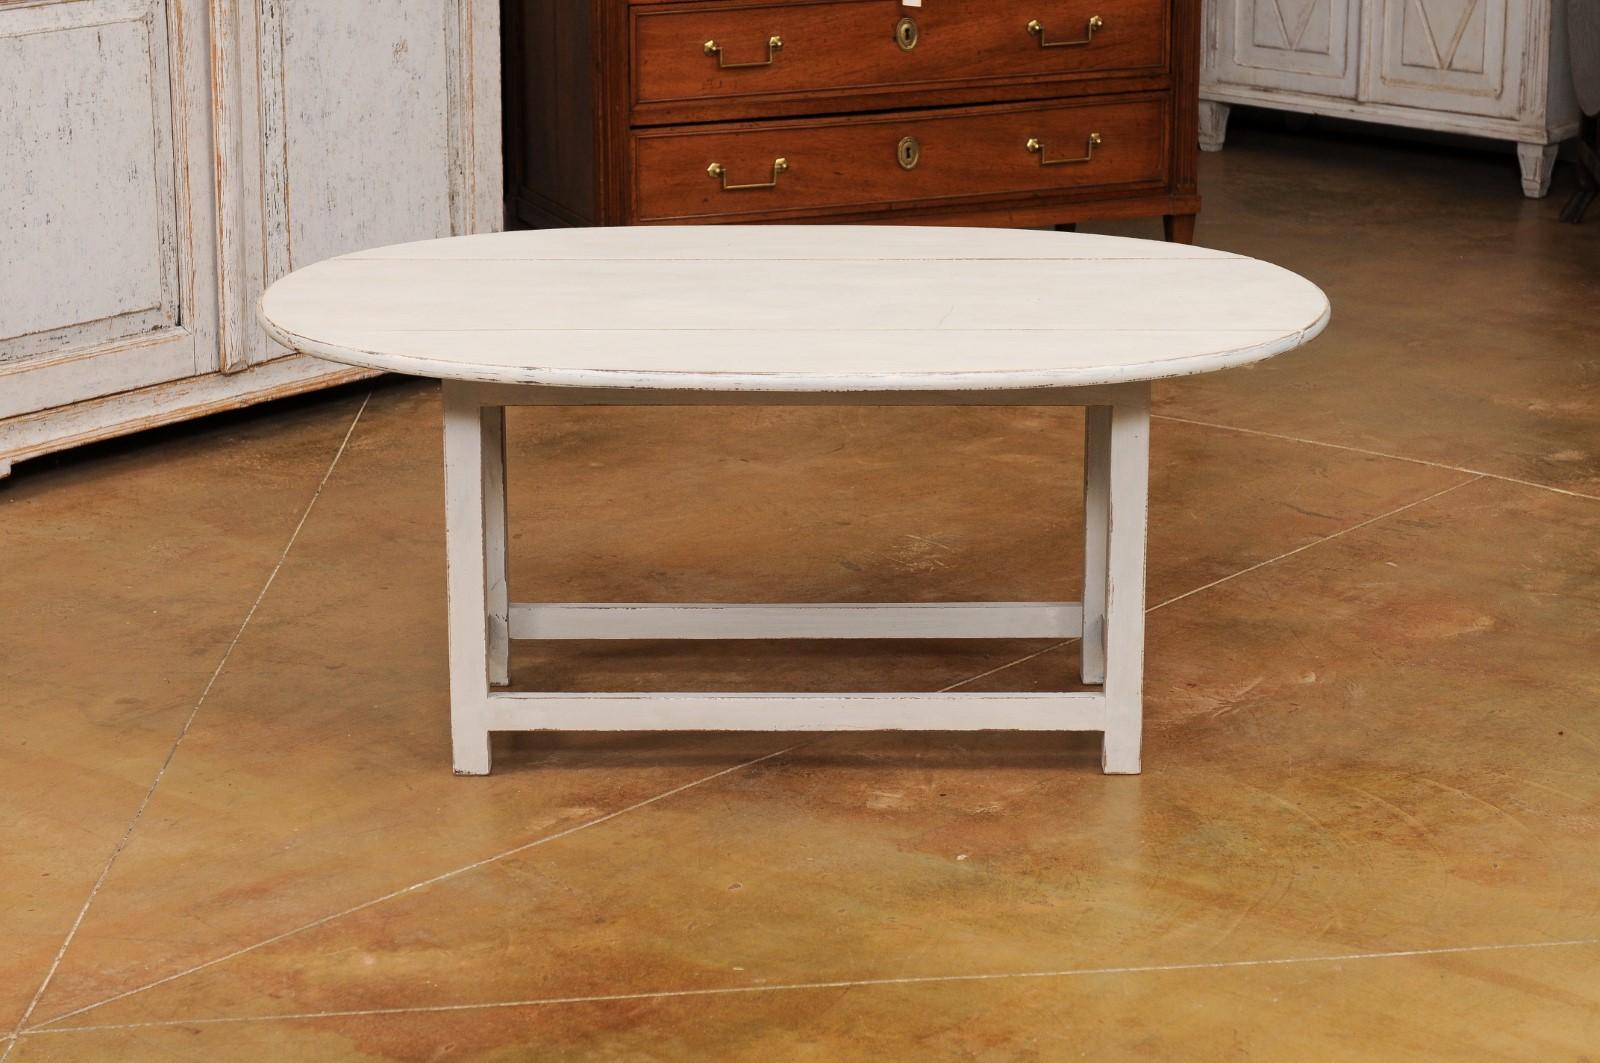 Swedish Grey Painted Oval Top Drop Leaf Coffee Table from the 20th Century For Sale 1